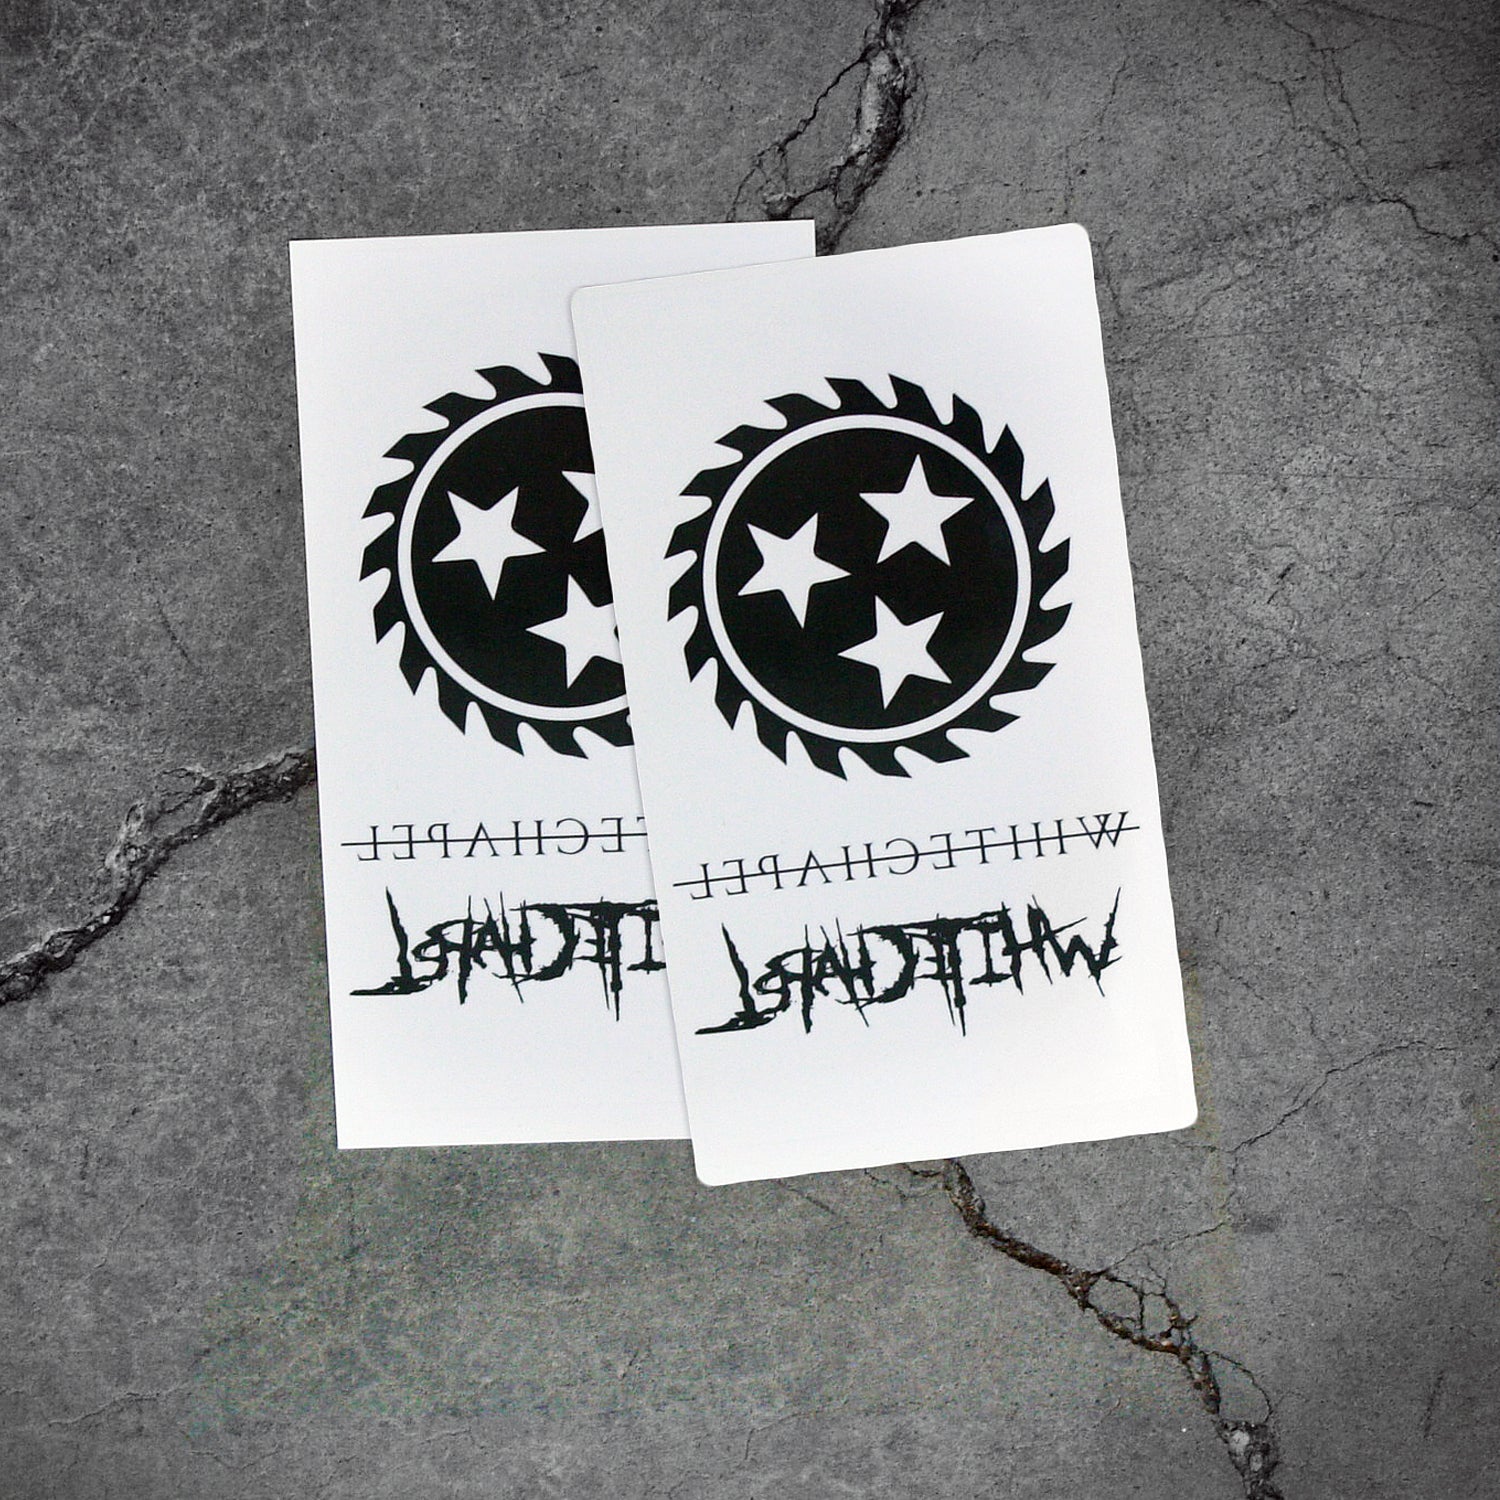 Image of two white pieces of paper with temporary tattoos on them against a grey concrete background. There is a black sawblade with three white stars in the center of it. There is the word whitechapel in black text with a thin black line through it, and the word whitechapel in black heavy metal style font. Both sheets are identical.